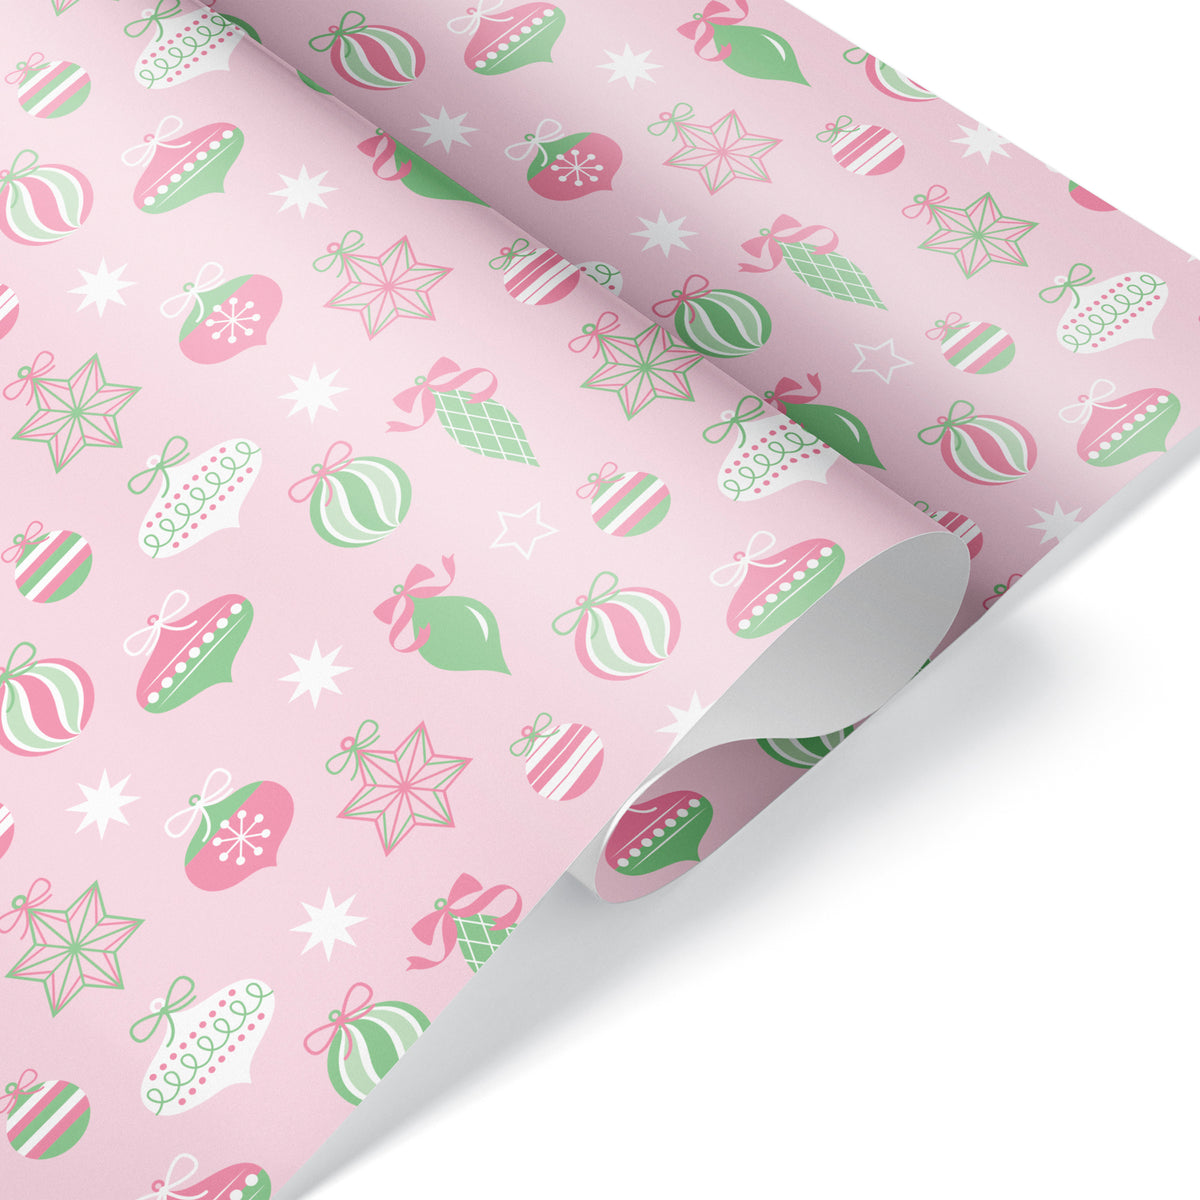 Retro Ornament Christmas Wrapping Paper - PINK